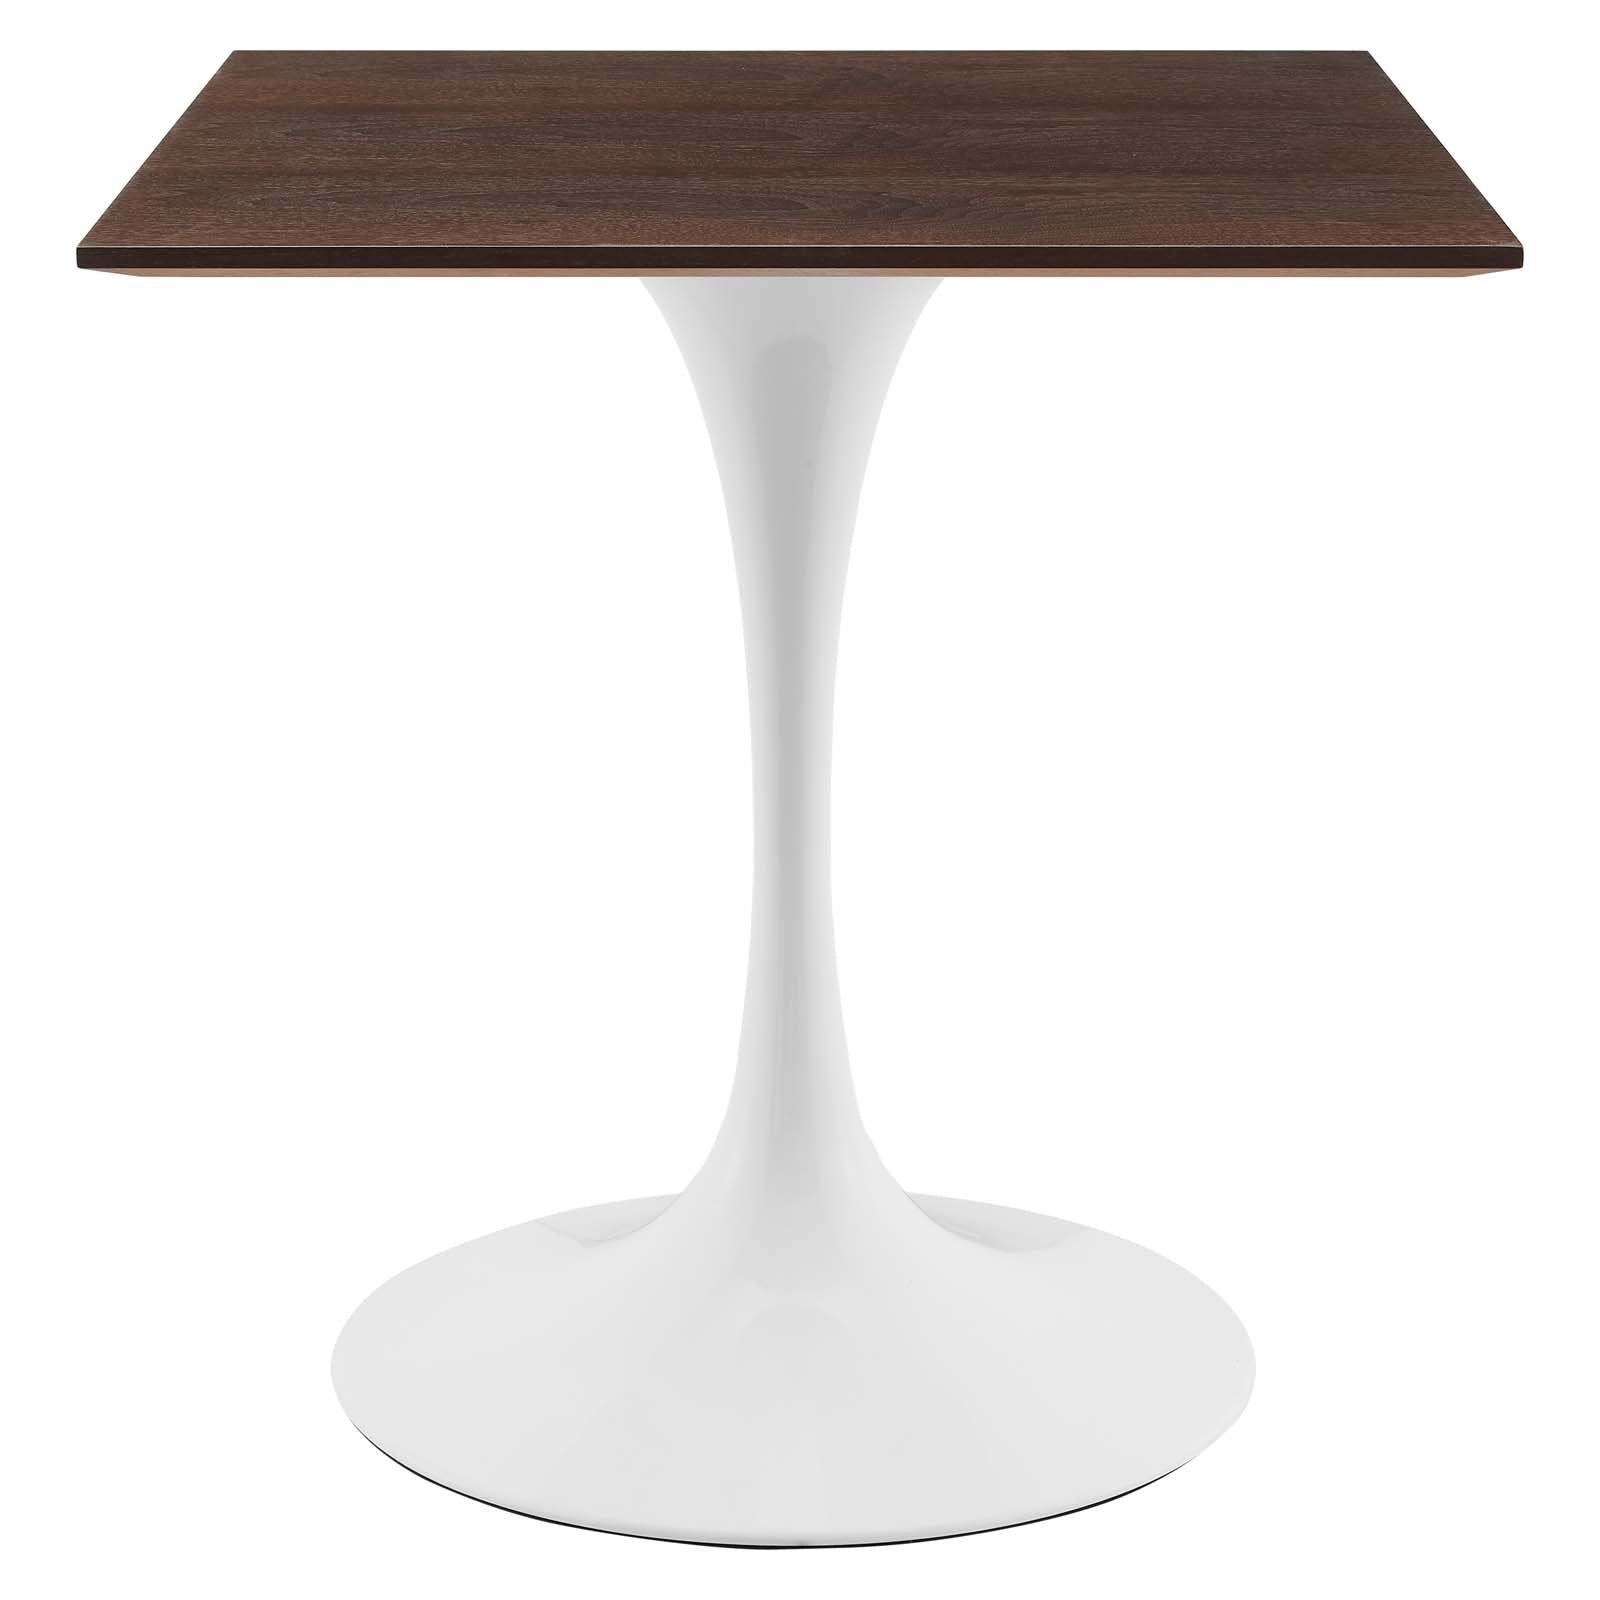 Lippa 28" Square Dining Table - East Shore Modern Home Furnishings